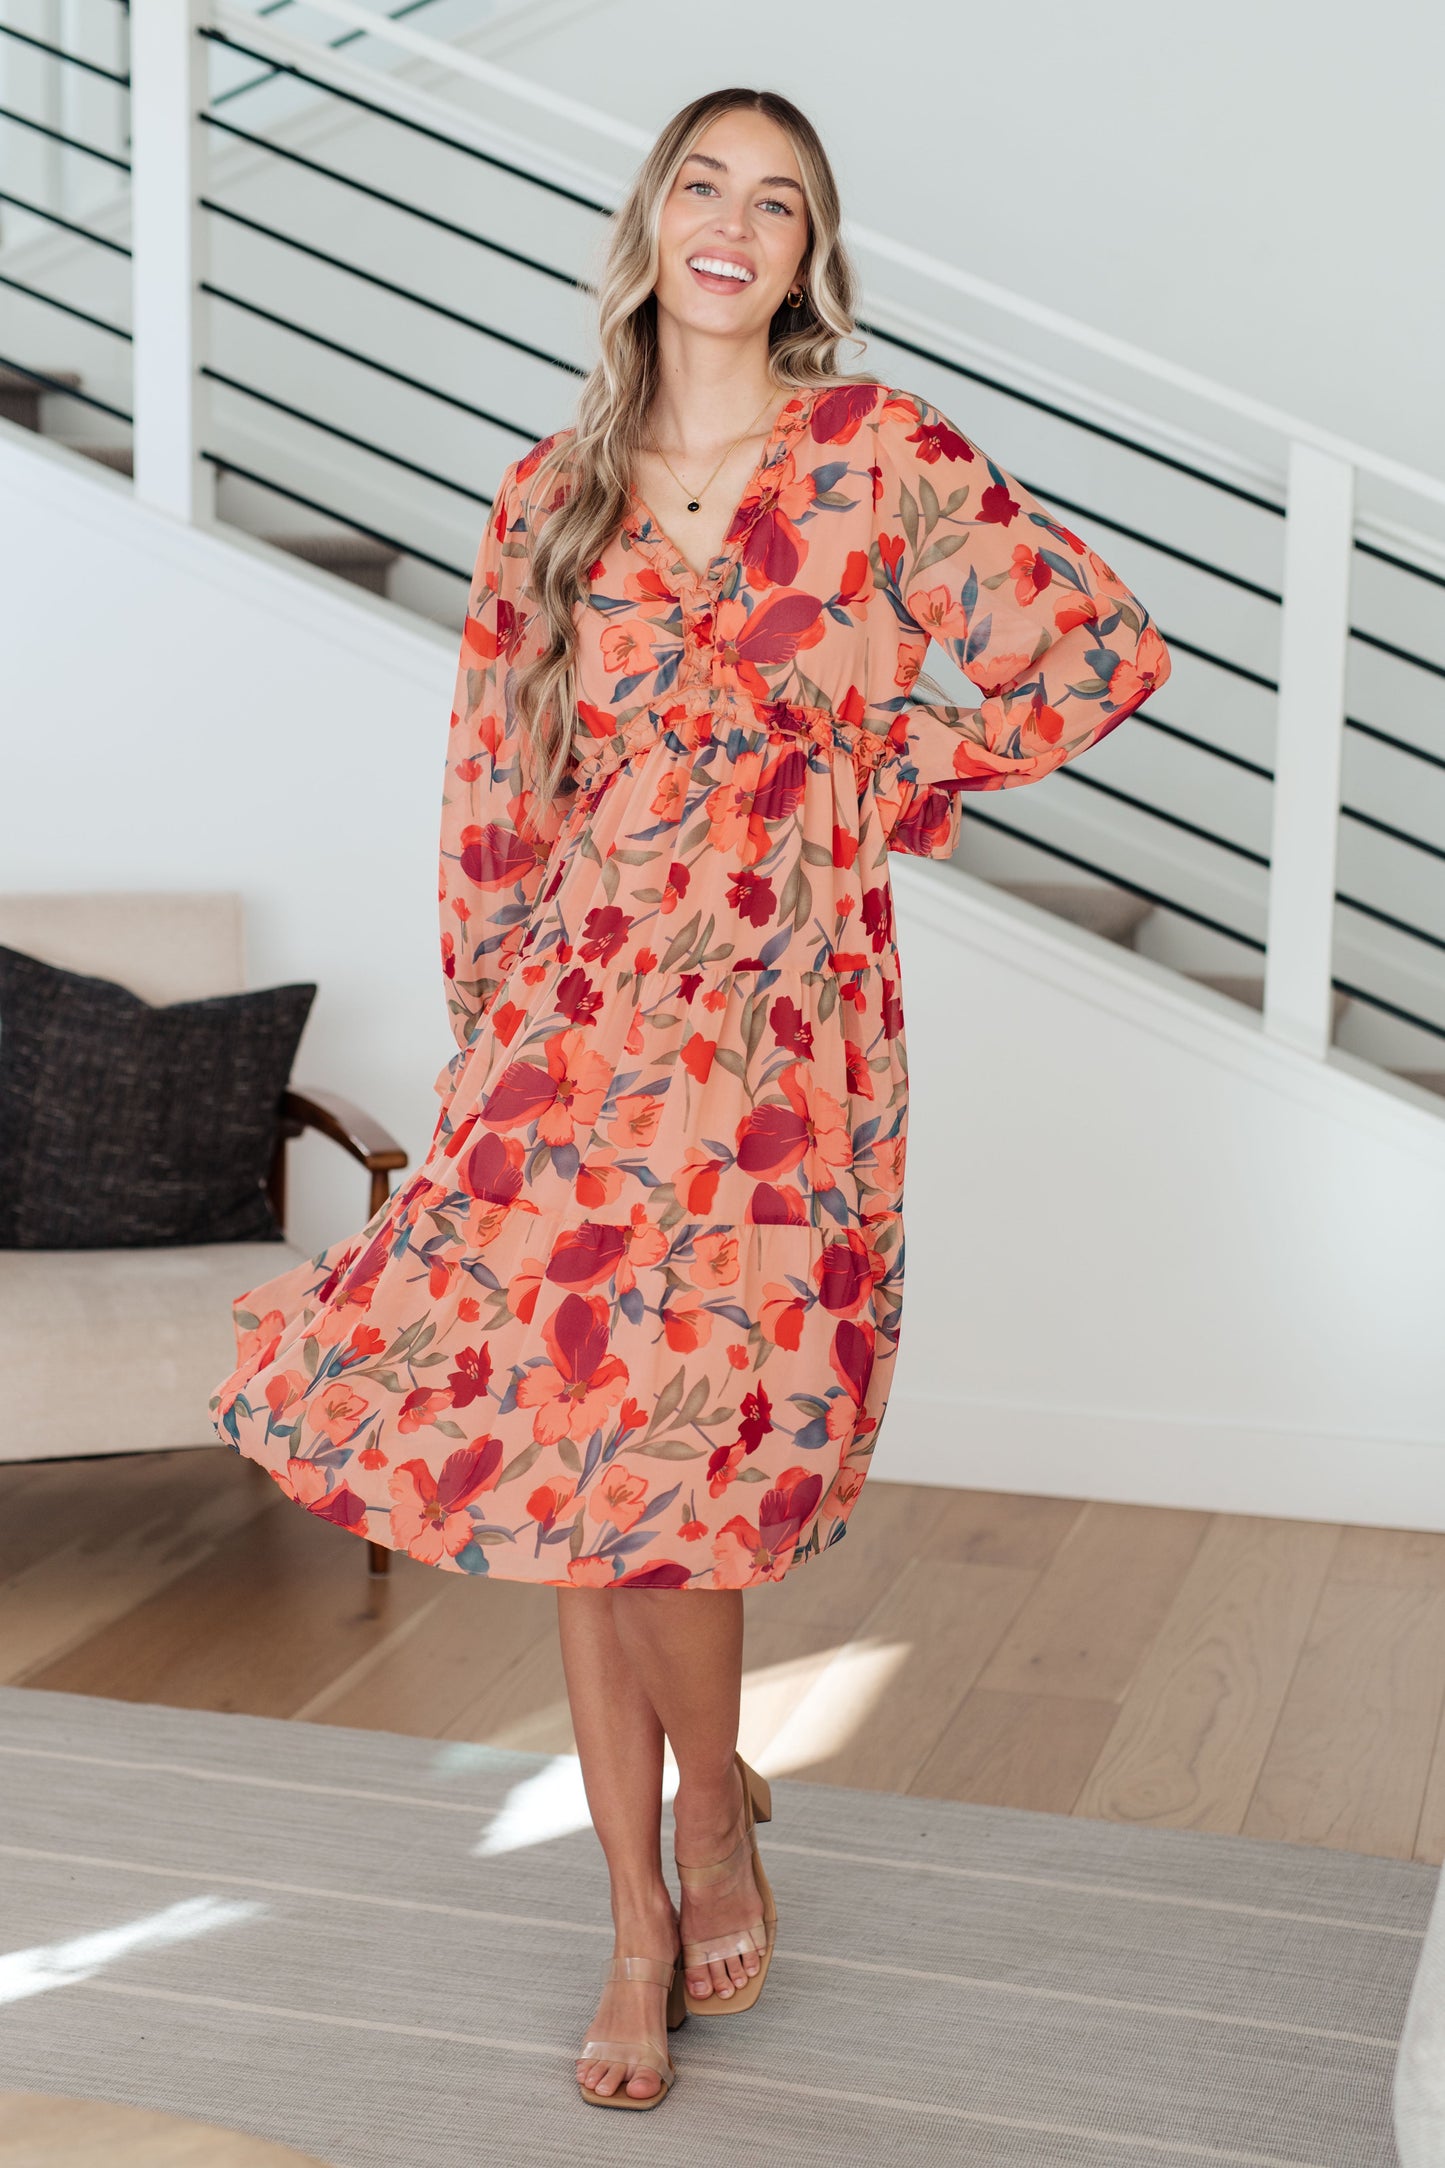 Chic Floral Dress